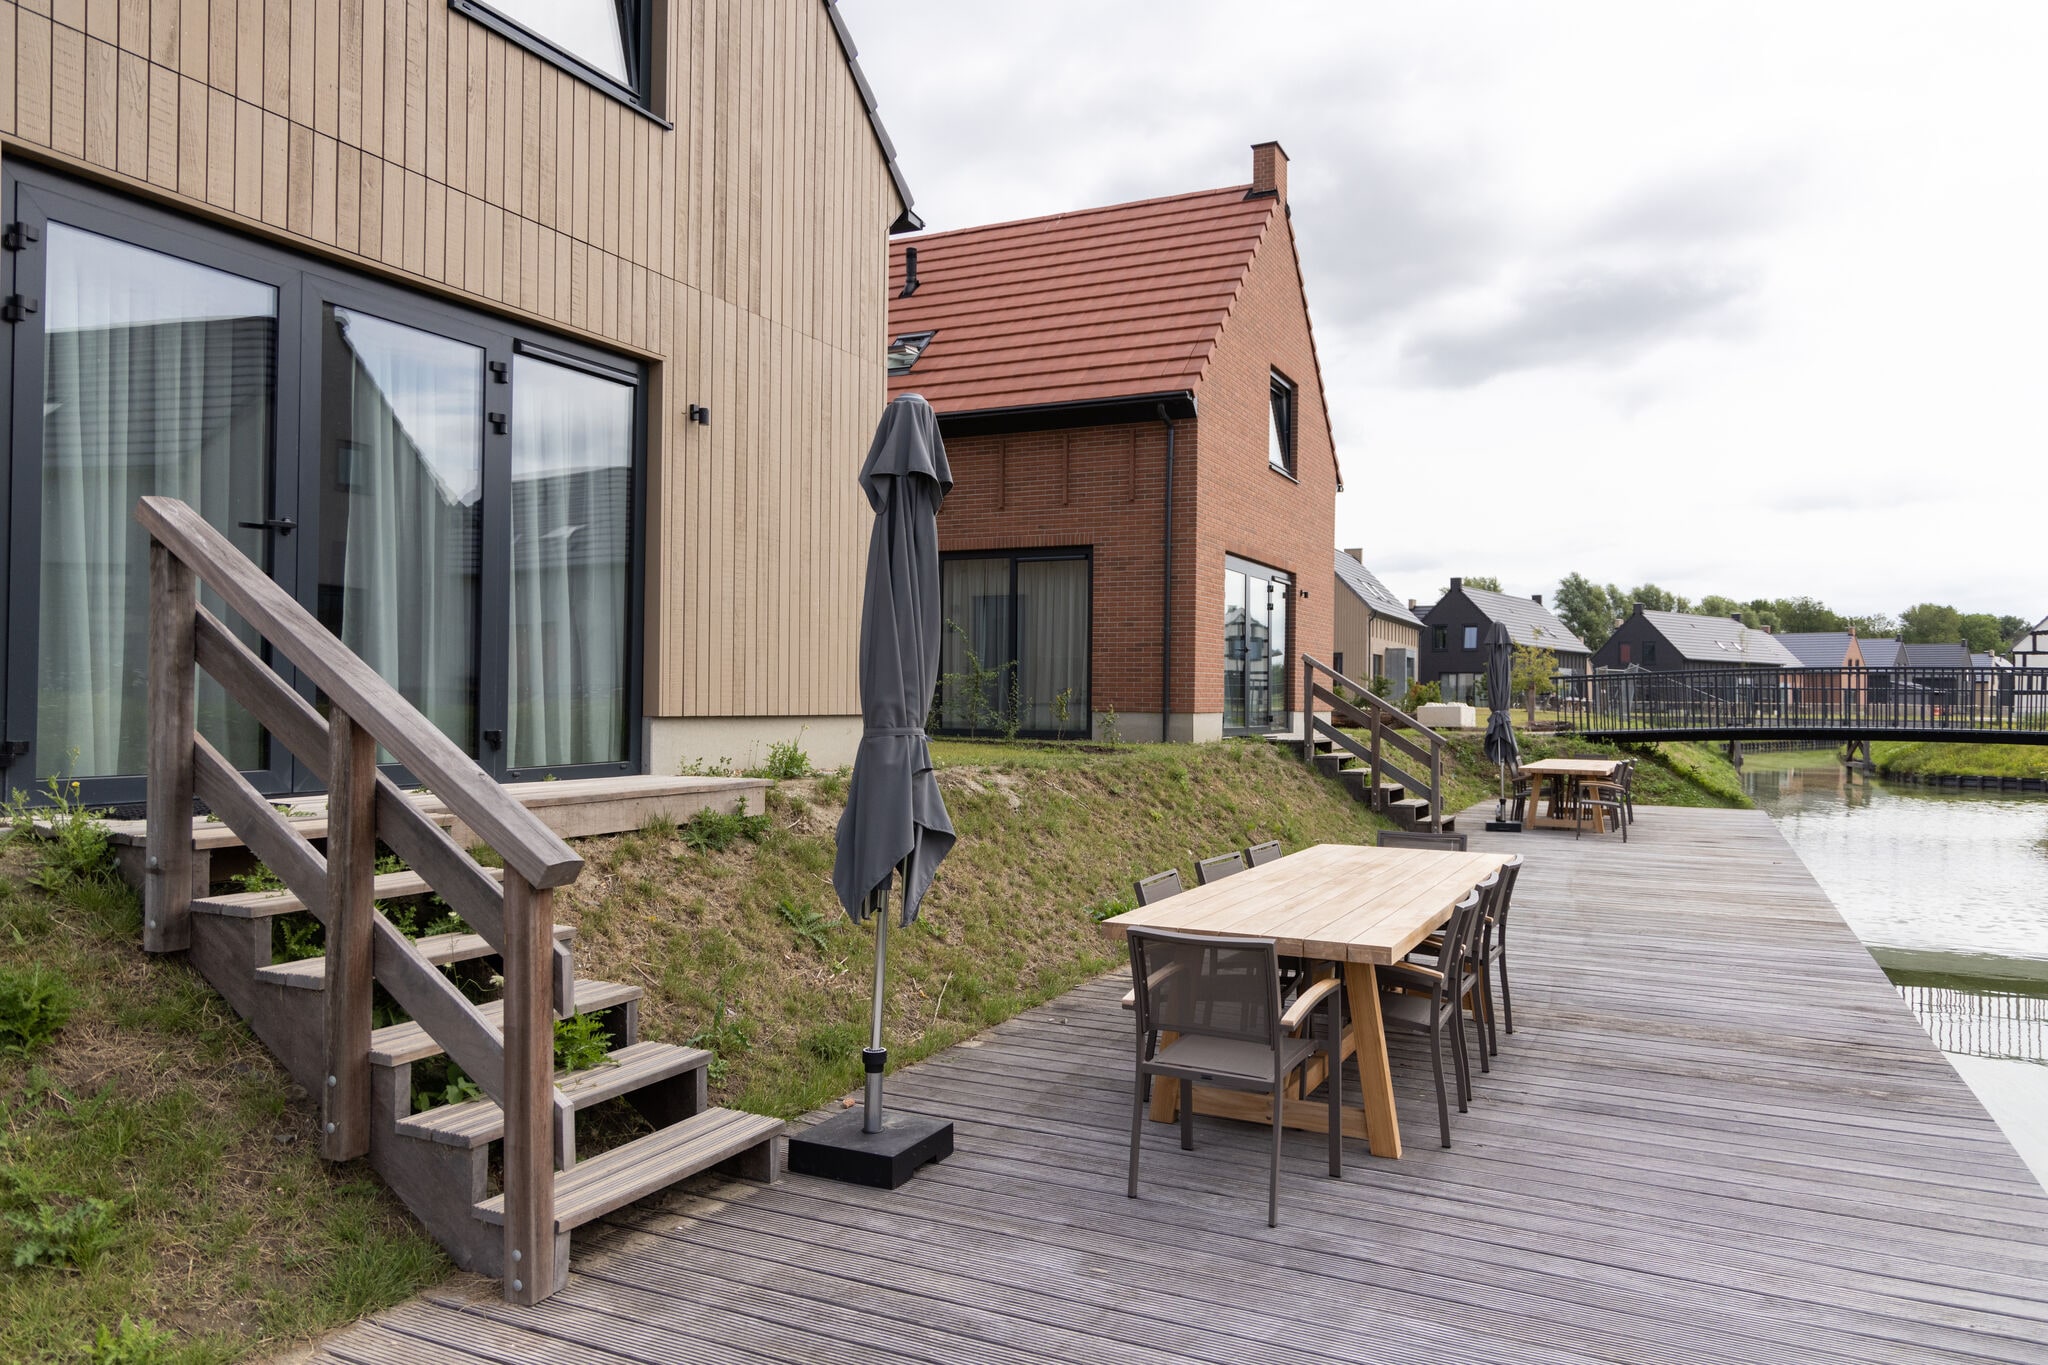 Luxury villa with sauna, located on the water, near the Veerse Meer